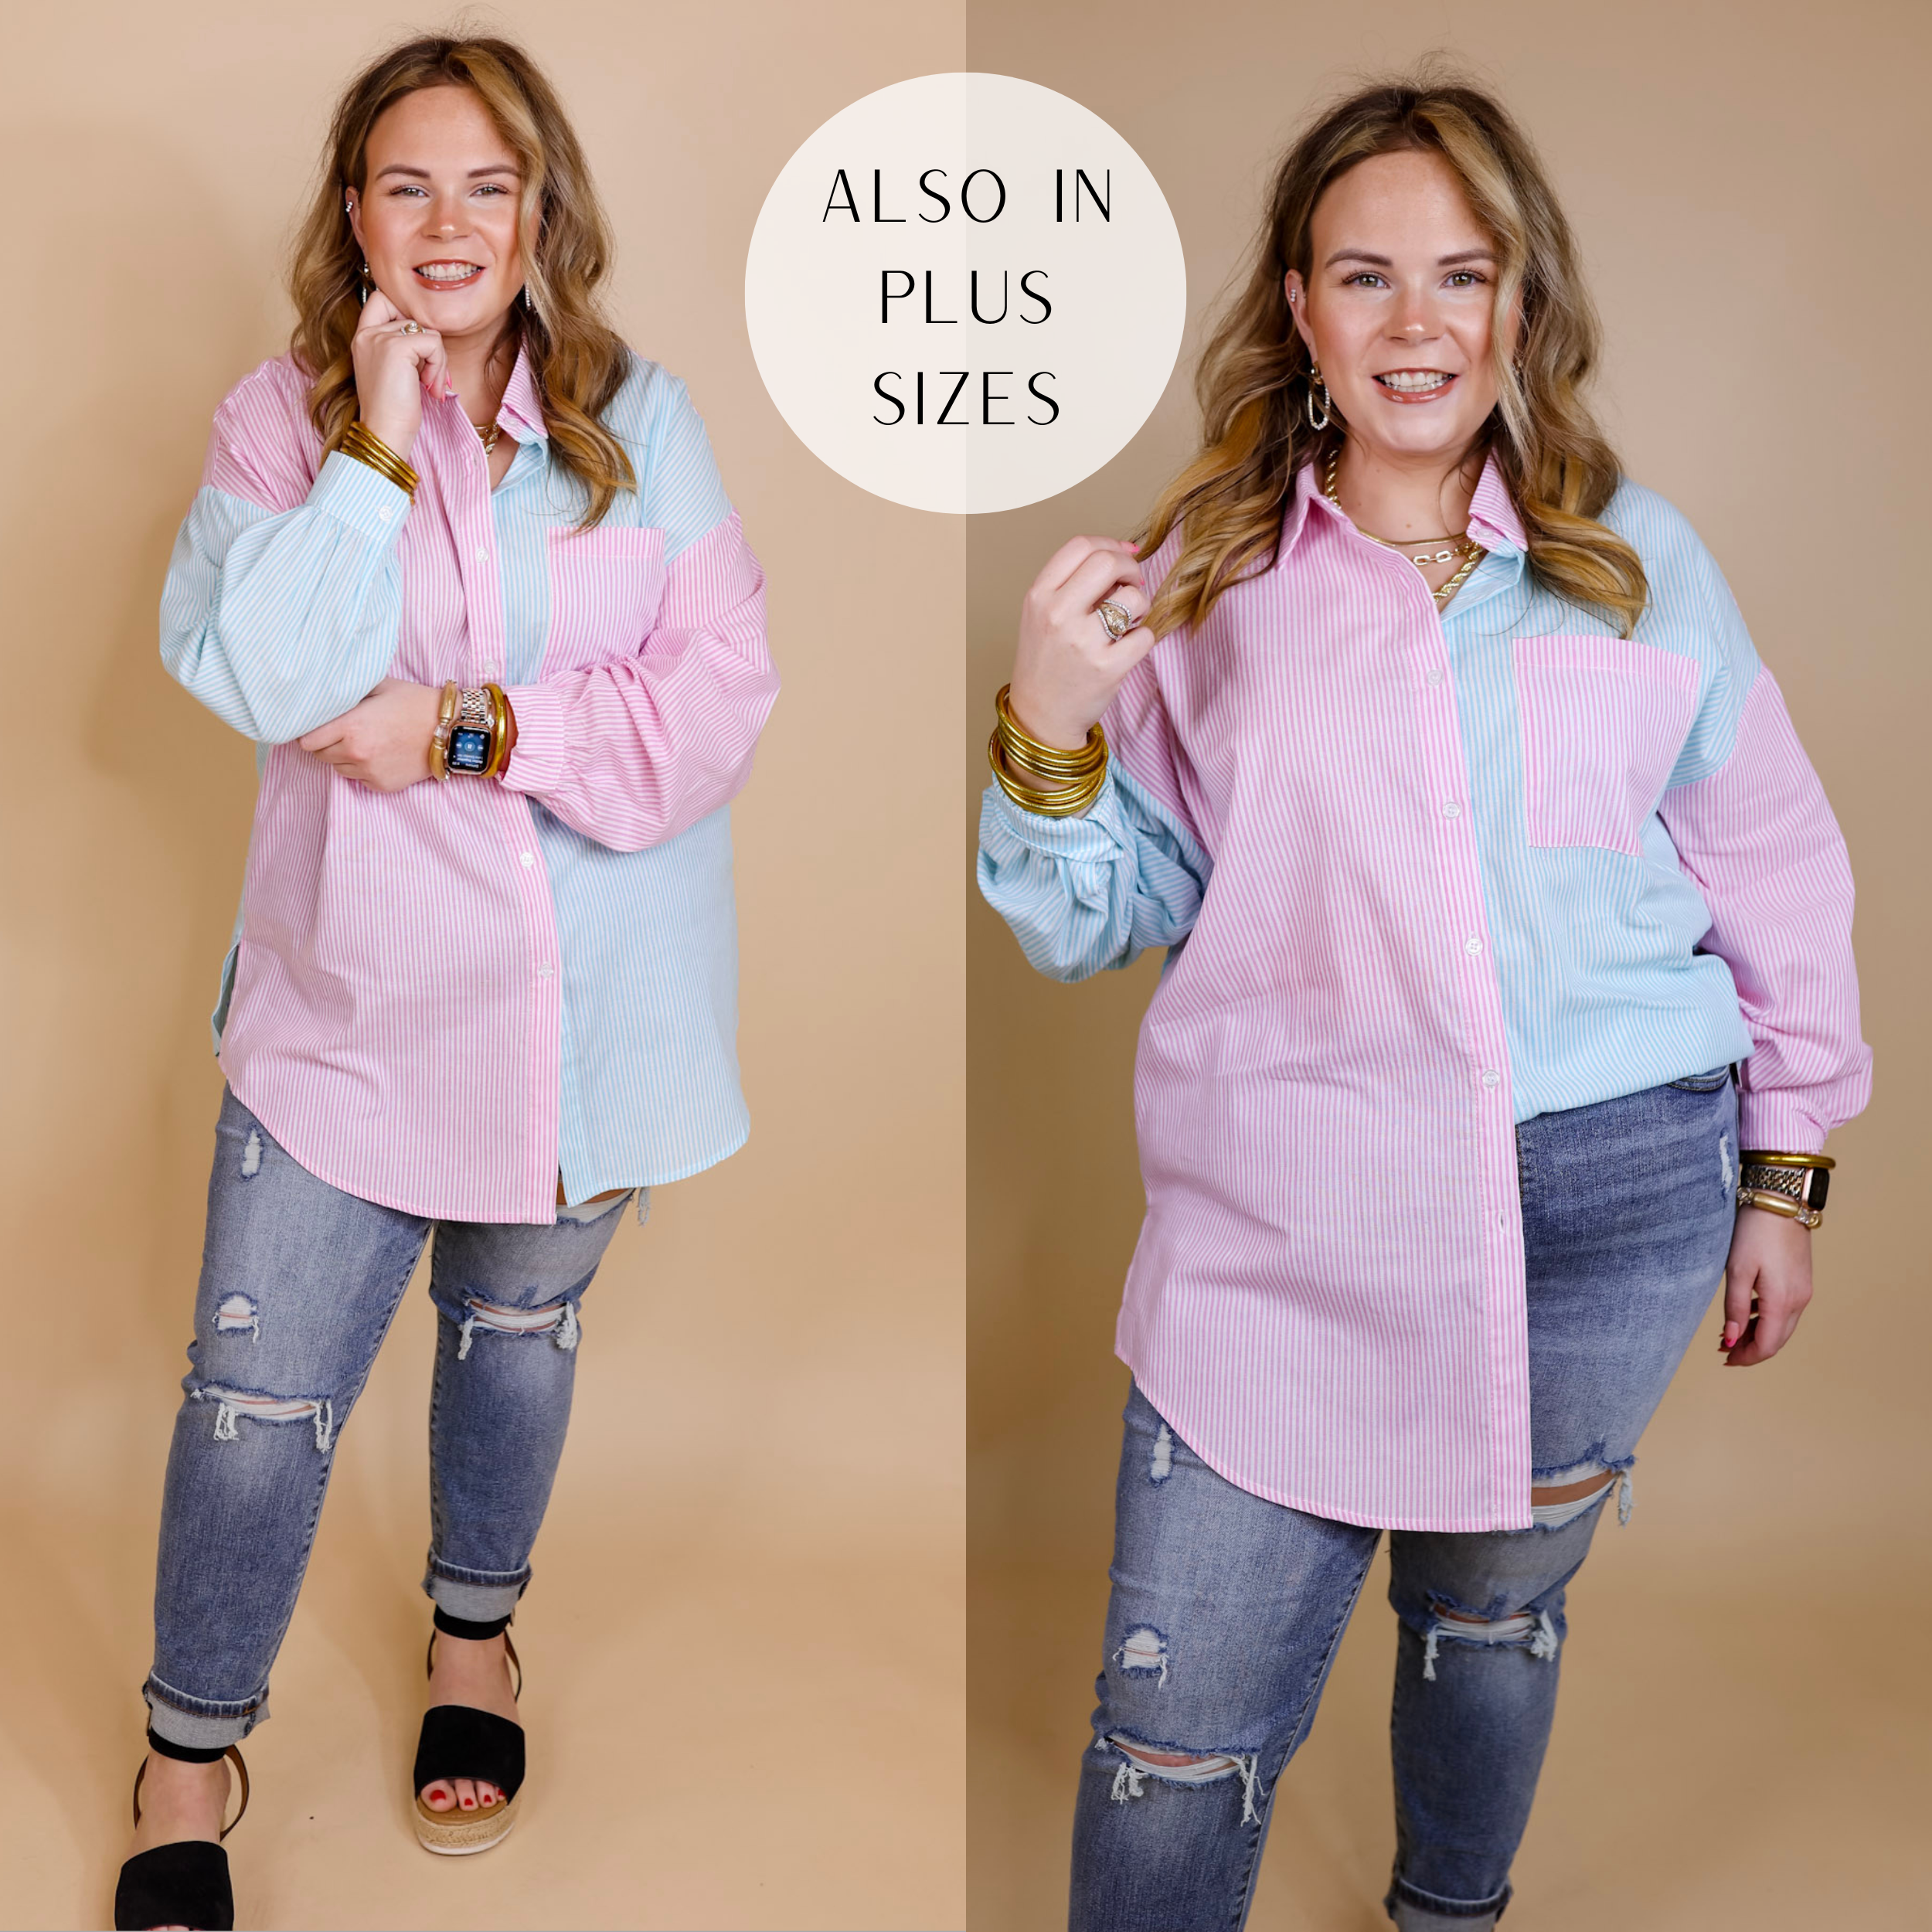 Model is wearing a button up top that is half pink stripes and half blue stripes. Model has this top paired with distressed skinny jeans, gold jewelry, and black sandals.